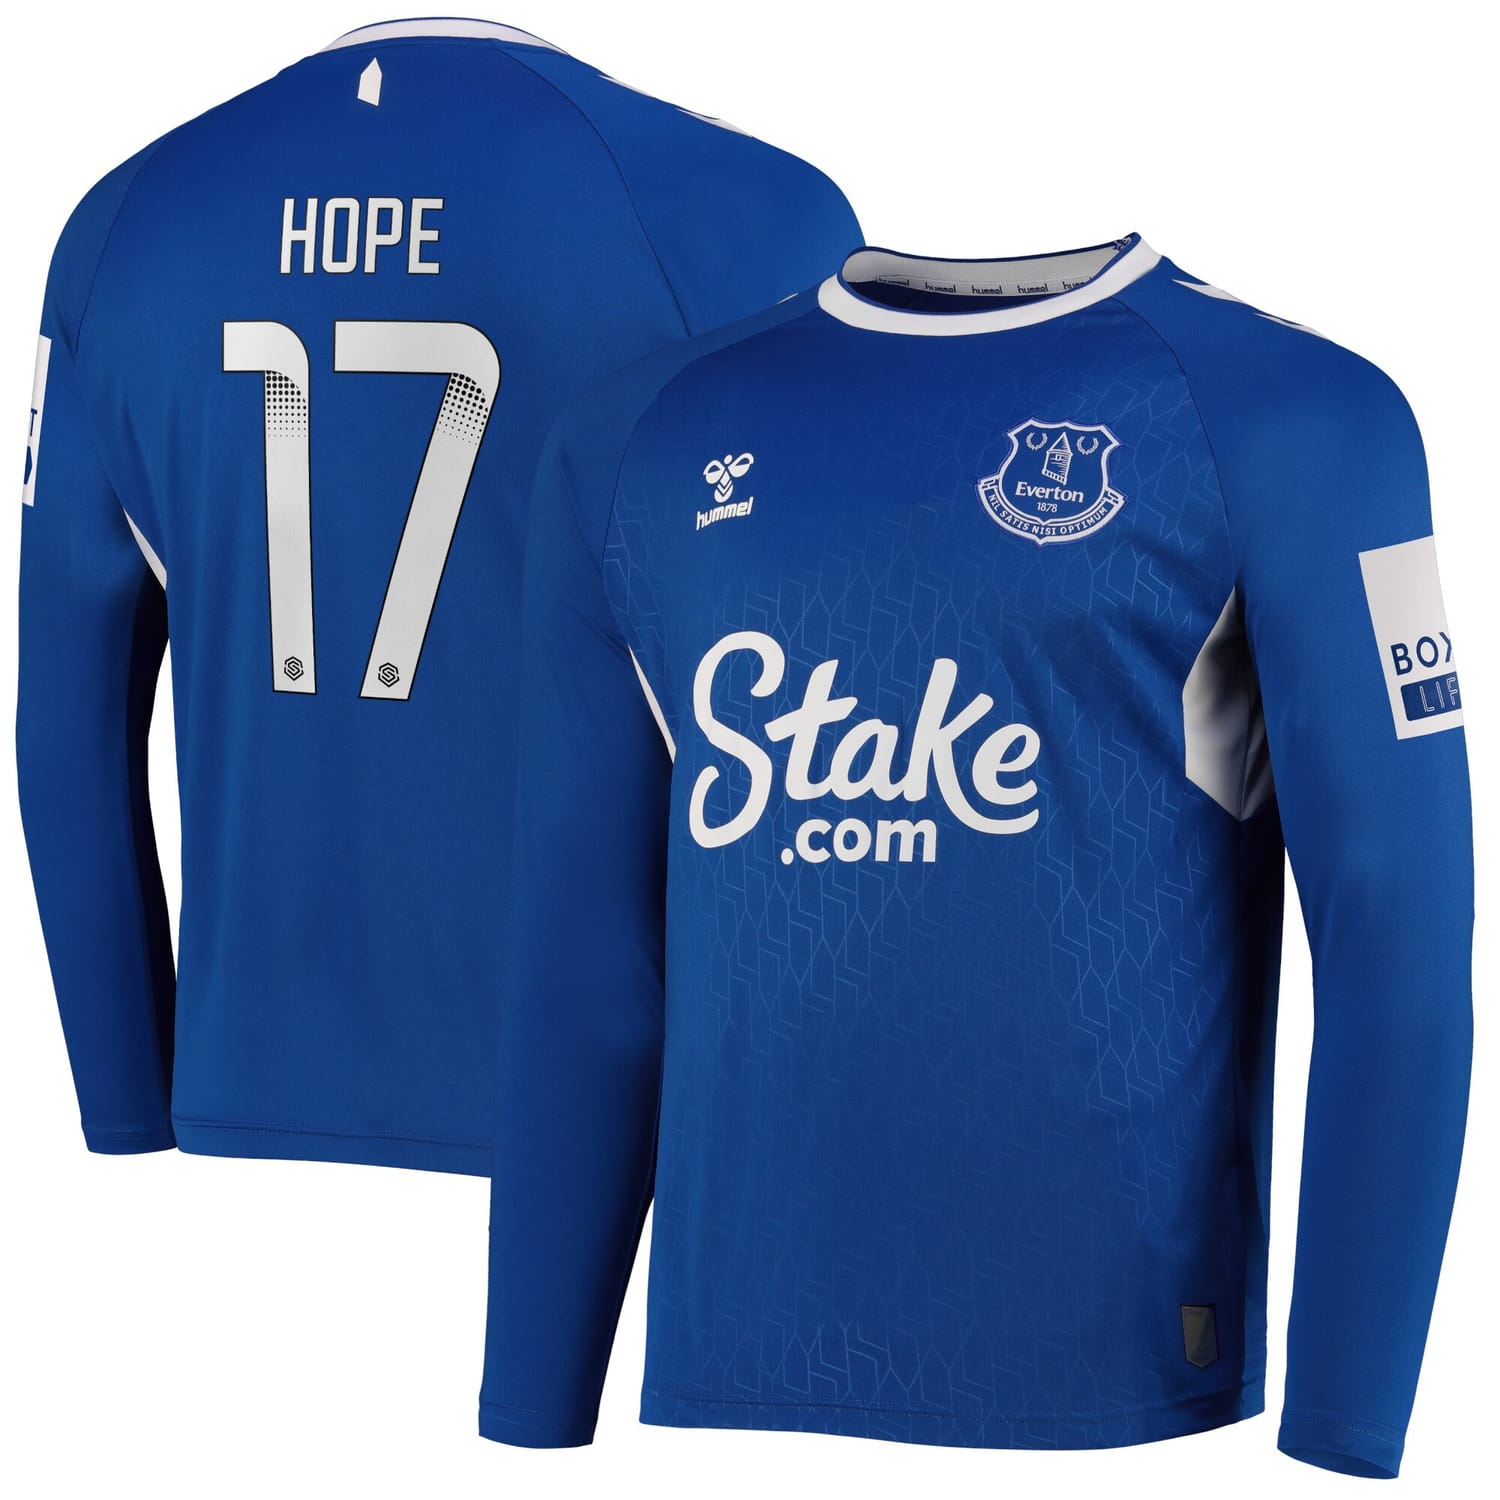 Premier League Everton Home WSL Jersey Shirt Long Sleeve 2022-23 player Lucy Hope 17 printing for Men